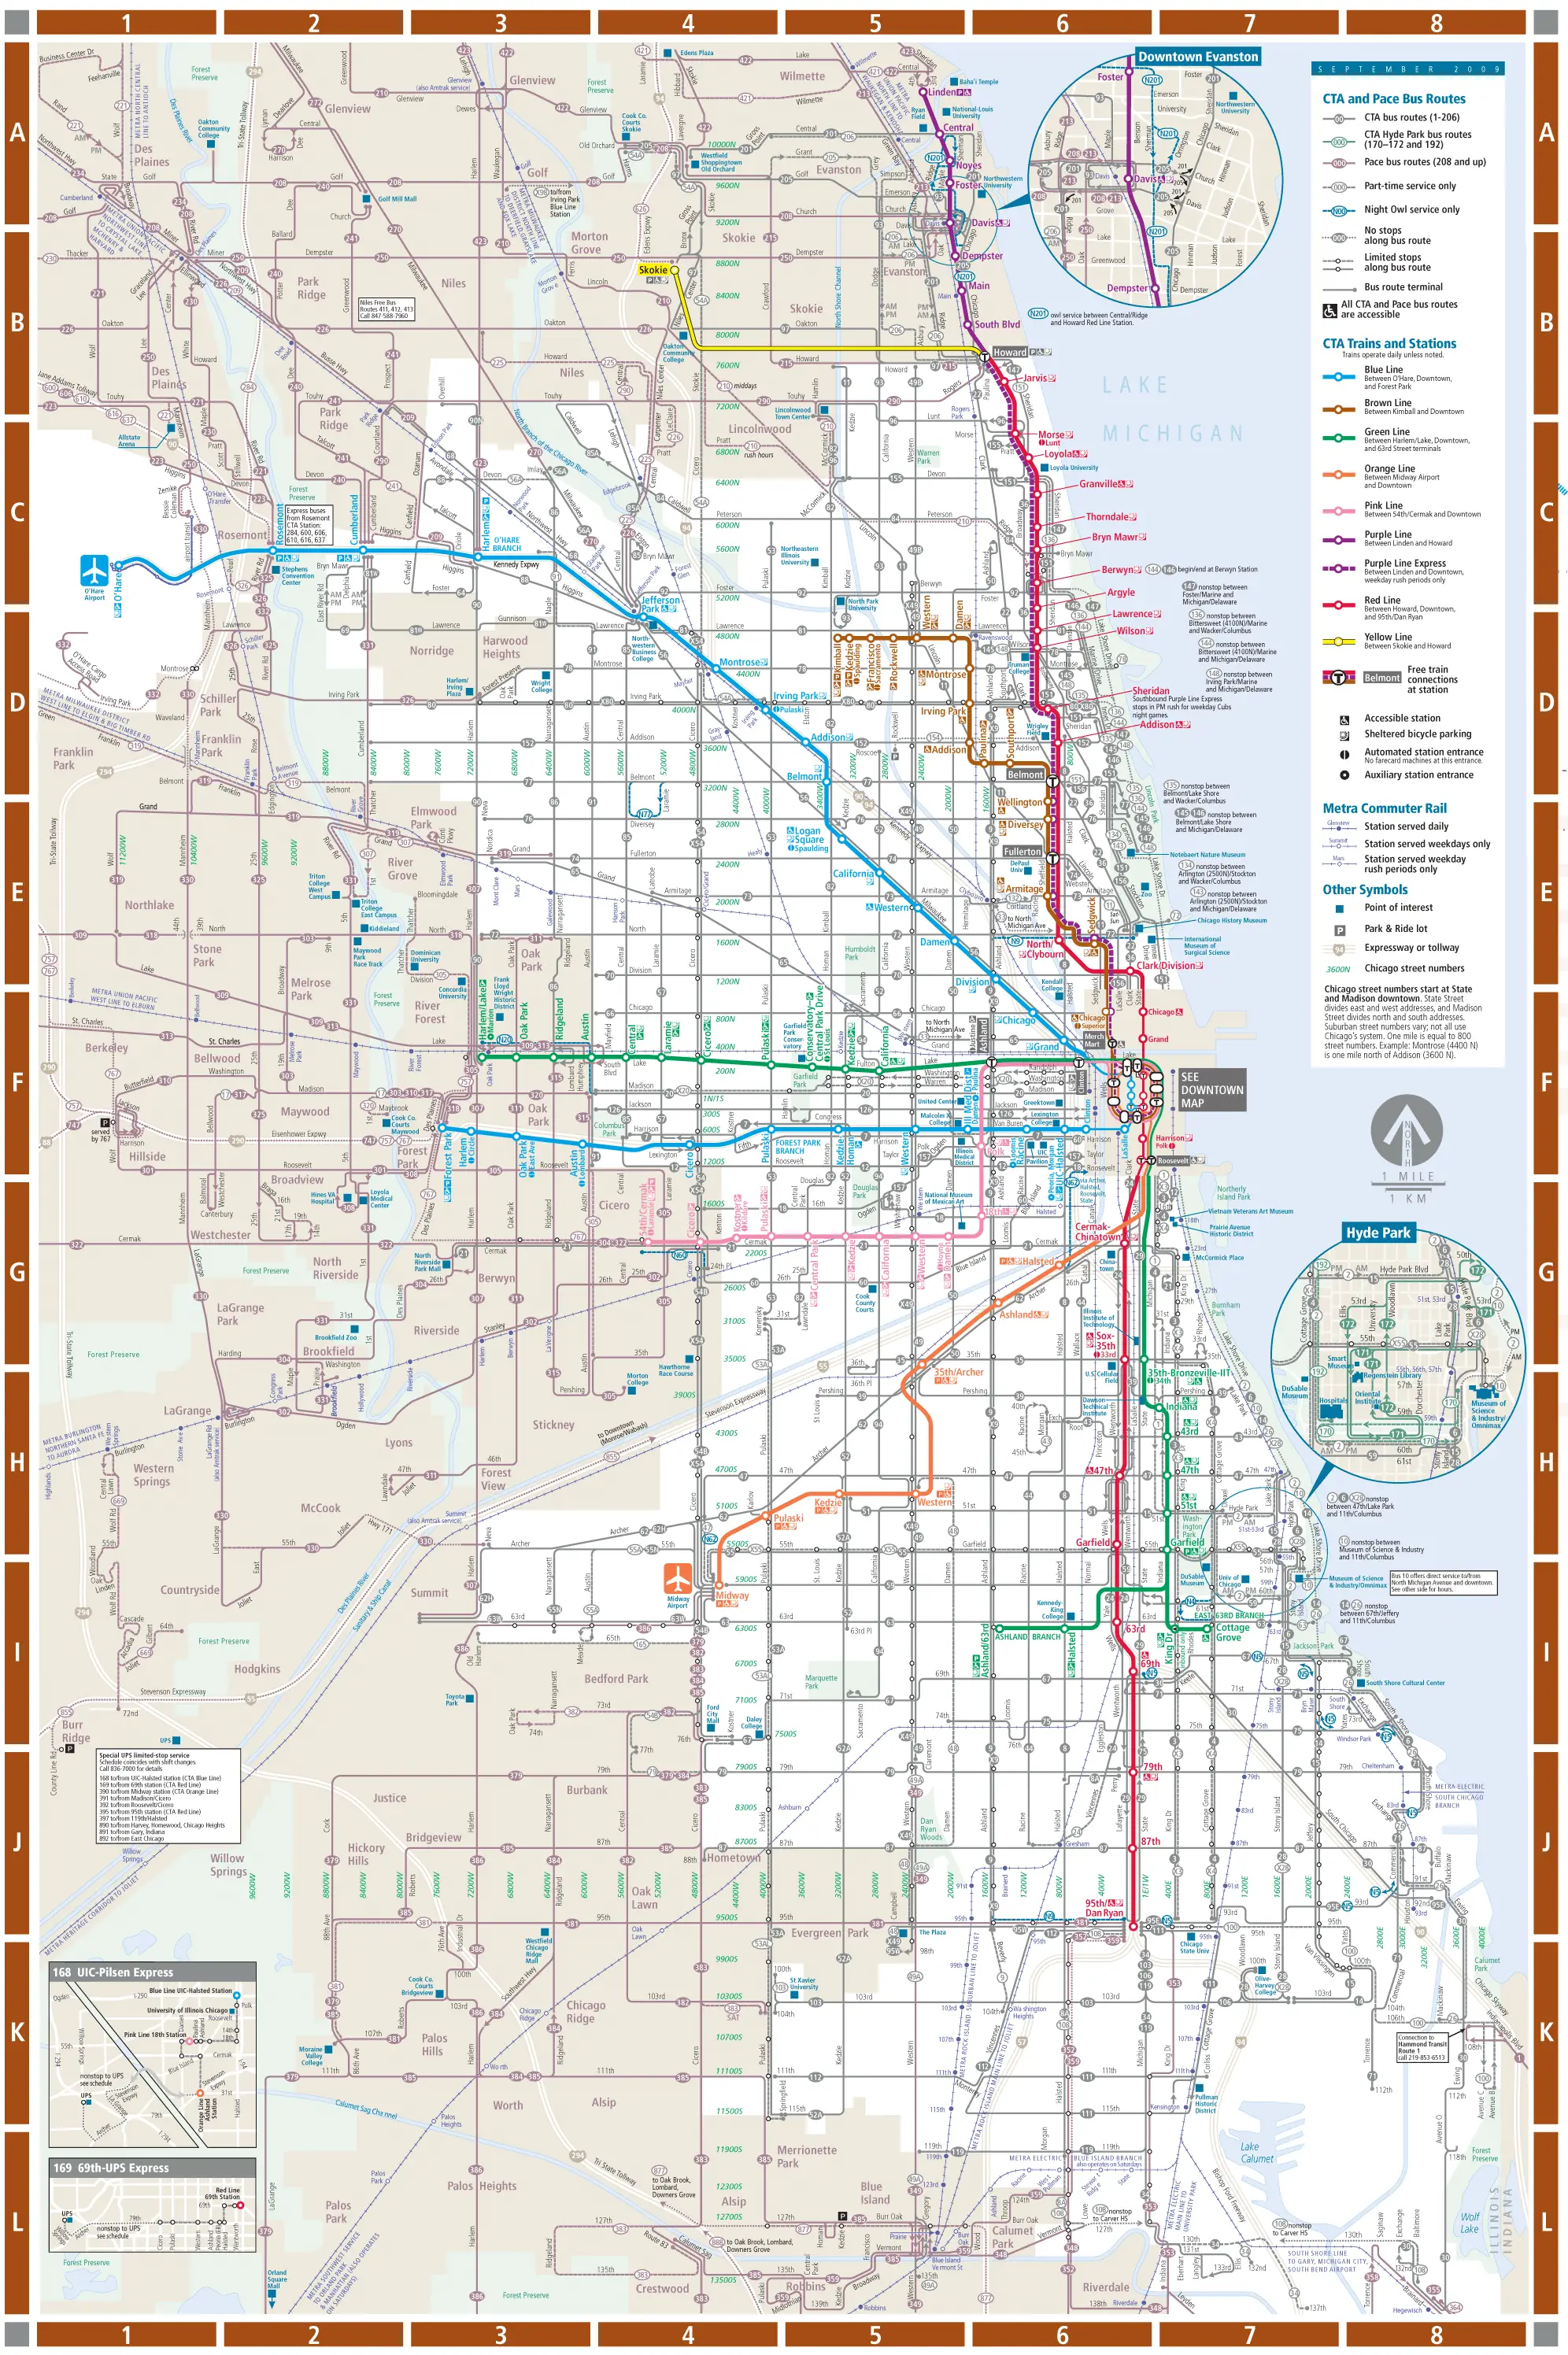 Chicago Detailed Rail Transport Map